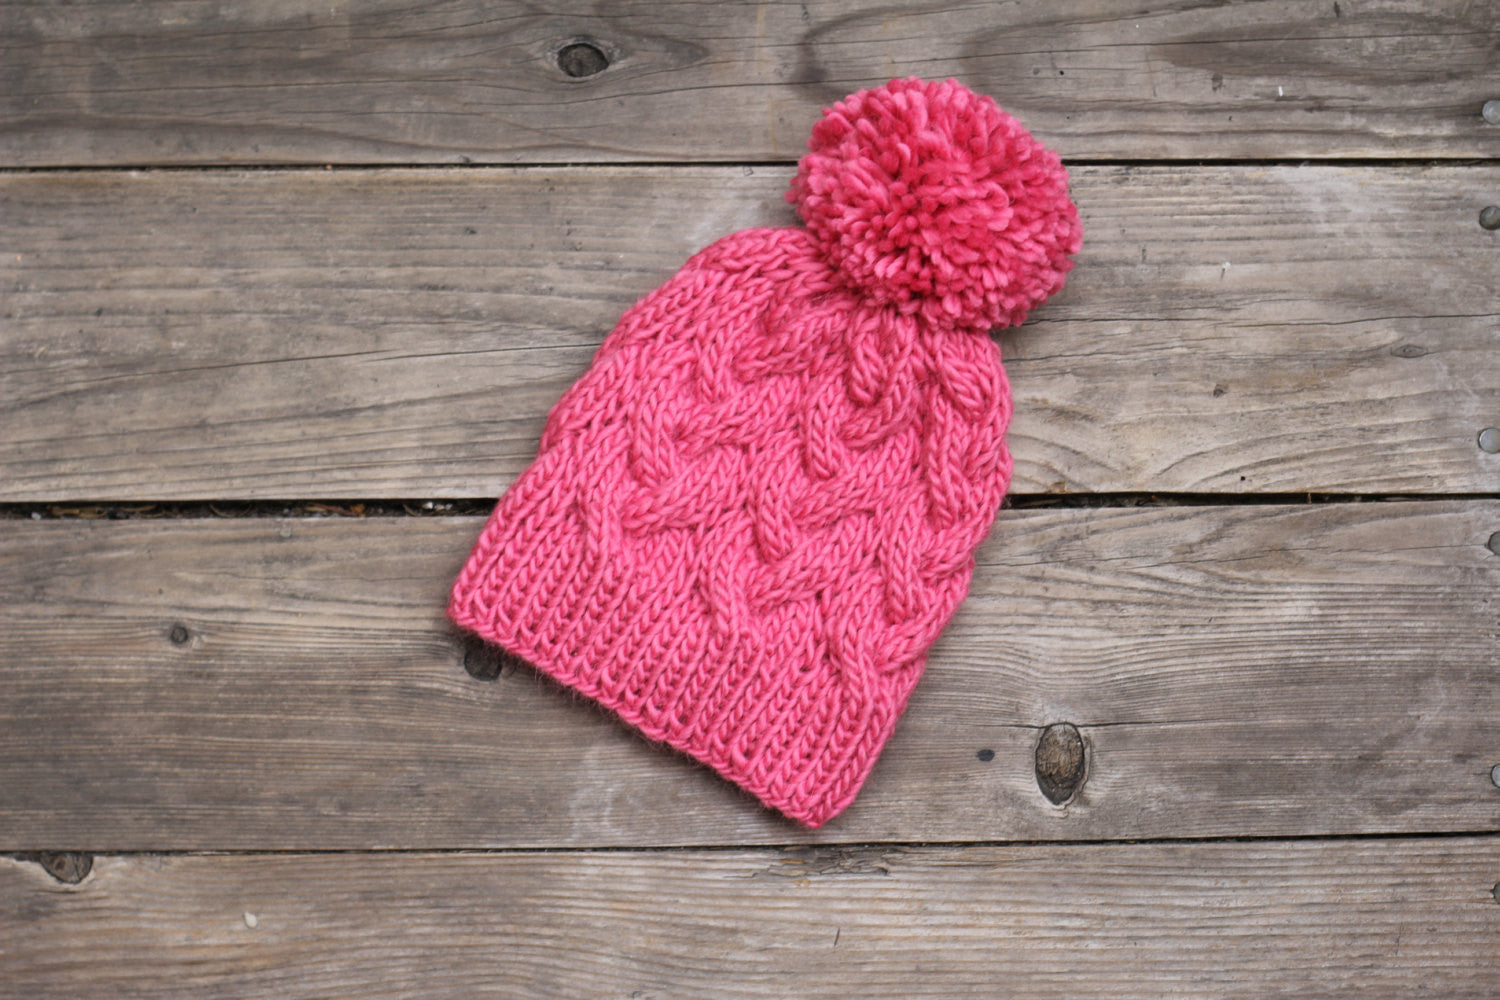 Knit cabled hat for women